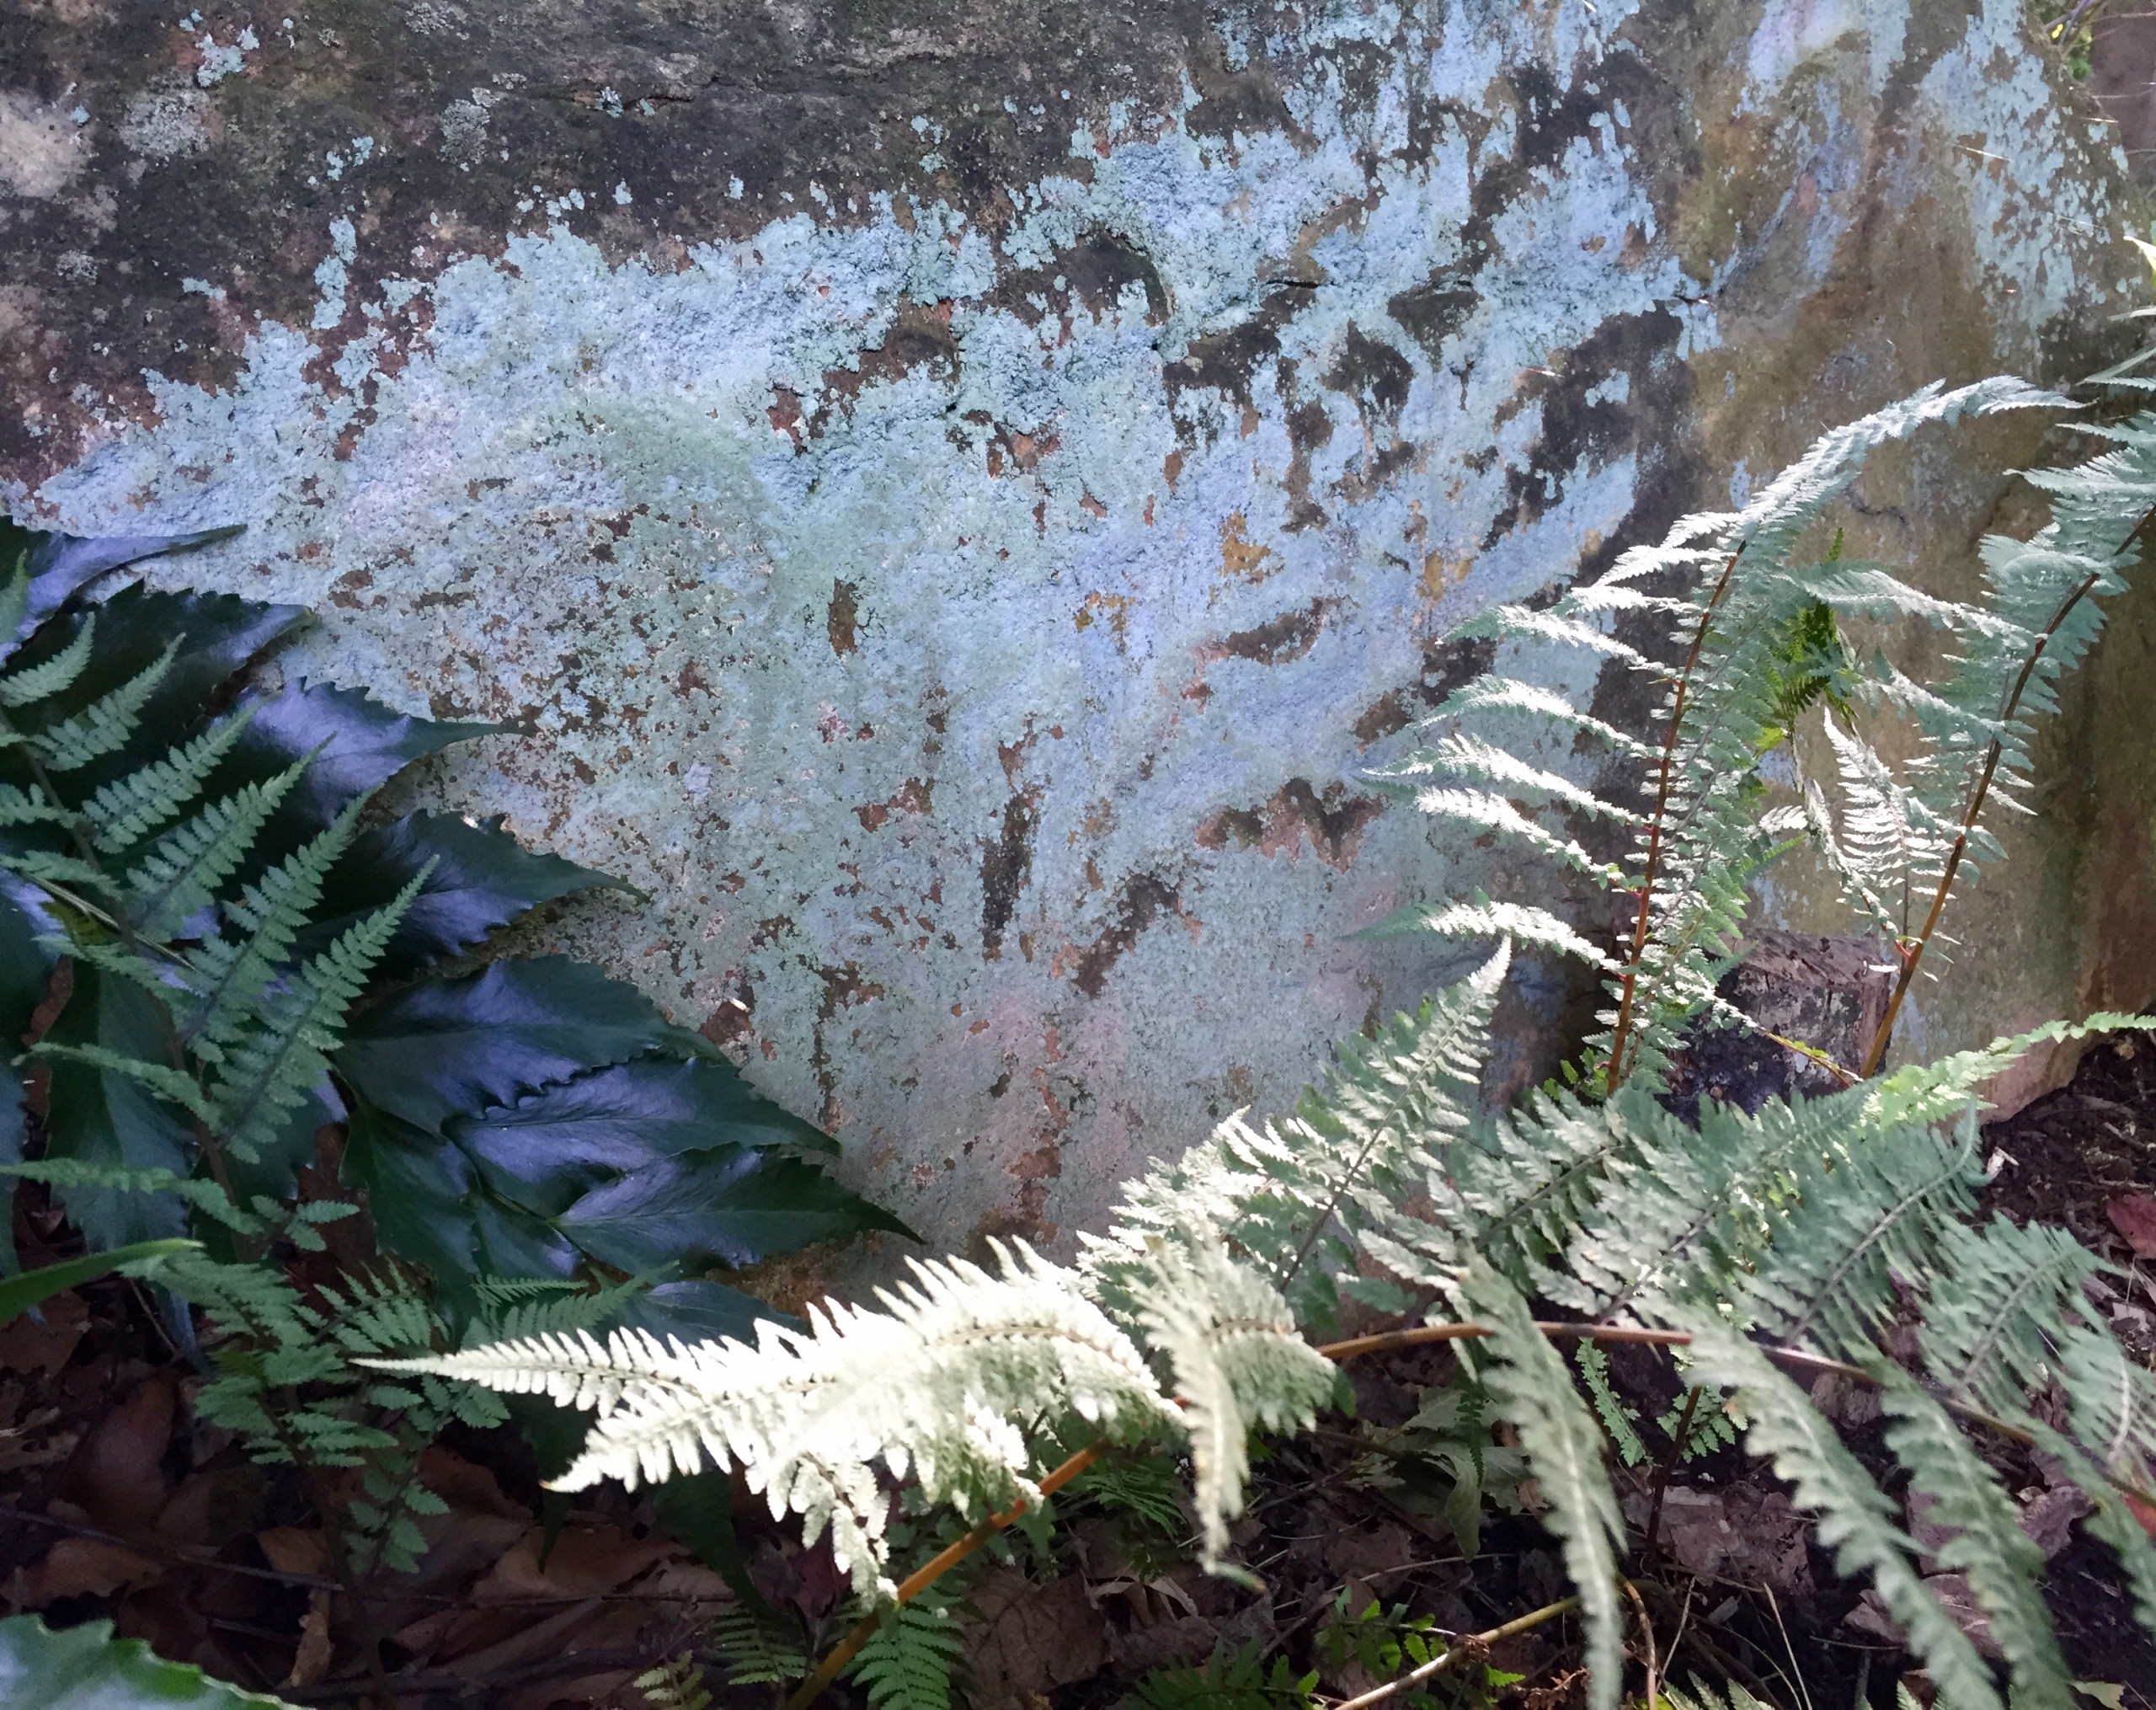 Ghost fern and lichens